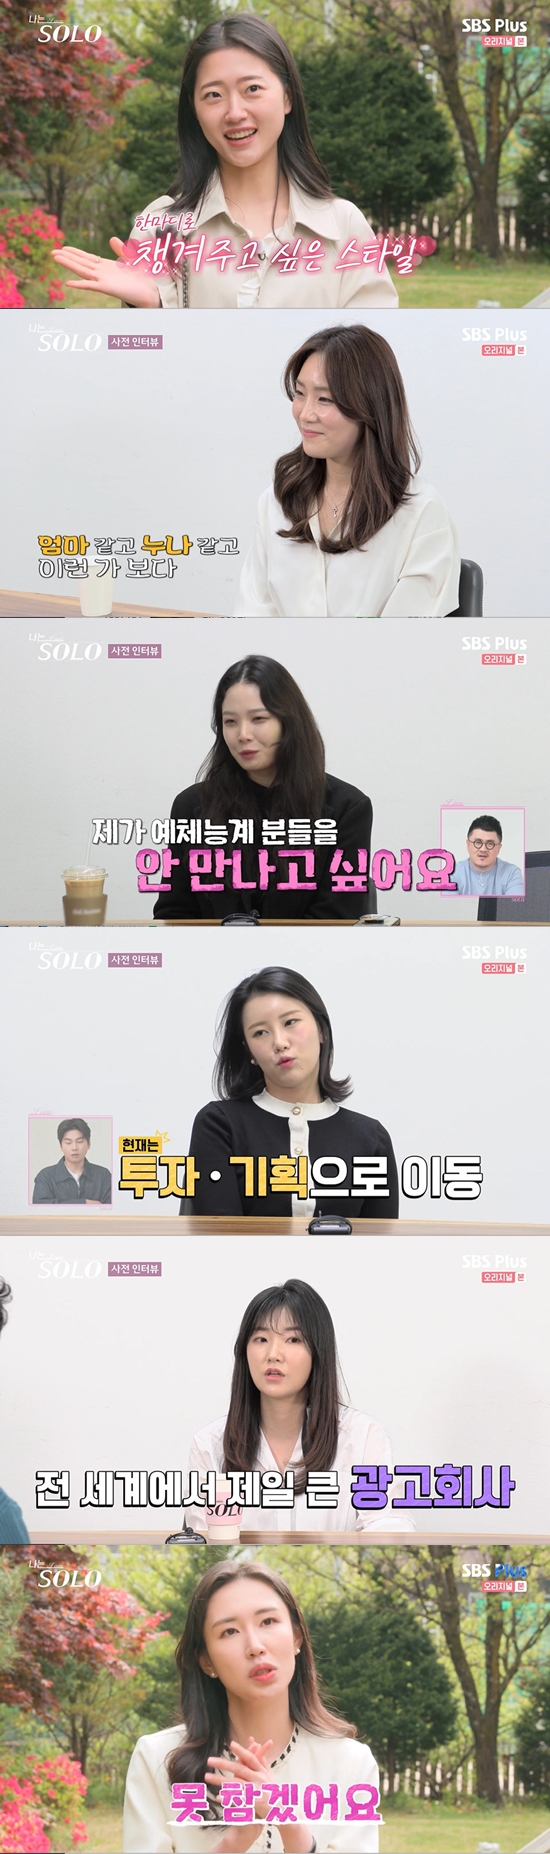 The ninth female cast has been released.On the 29th, SBS PLUS and ENA PLAY Im SOLO were the first meeting of the 9th performers.On this day, Young-sook saw Young-soo who met him and said, I thought the director of the broadcasting station was here.Young-sook is a broken character. Im a sloppy character. I cant break. But thats the charm. I hate when someone likes me.I cant afford it in front of people who like it. It looks unattractive. There are always points that fall out, but there is no common point.Jung Sook, who has been in love with his younger sister so far, said, My younger sister was twisted a lot and my younger sister was well done.I am actually worried that I will marriage when I come out here. I am good and scared. Sunja was from the Department of Dance at Korea National University of Arts, where he said: I dont want to meet arts and physicalists, freewheeling but unseemly.I do not want to see you so drunk in your own style. Before the appearance of the English character, the name tag fell to the floor. The name tag of Yeongcheol fell. Defcon, who watched the video, said, Why do you double-track?Is there something between you two?Youngja, who is going to Samsung Electronics, introduced himself as I came up from Jinju at the age of 19 and was in the production line for about two years and moved to investment and planning.Even if there is a difference in age, if you do not make a difference when you are well managed and go together, it does not matter if you are 10 years old.The 9th Oksun, who received the name of the topic, said, I think it will be cursed, but the company people called me Euljiro Kim Sa-rang.Im 37 years old, but Im not good at looking young, and Im a deputy, and Im a deputy, and I started work early, but the manager doesnt wear it on purpose.You cant go early. I want to go long and thin. My personality is so shabby that I get a bad feeling.It is not a blind date that ends in a day, so I came out because I thought there would be someone who likes my true self. The last Hyun Sook said, I know that a woman should be loved and a man should come first, but I can not tolerate it.I always called and called first, and then the men hated it. I hope (the man) is too good for me, and I dont think I would like it if Im too good.If you are too rich, you will notice it. Photo = SBS PLUS and ENA PLAY